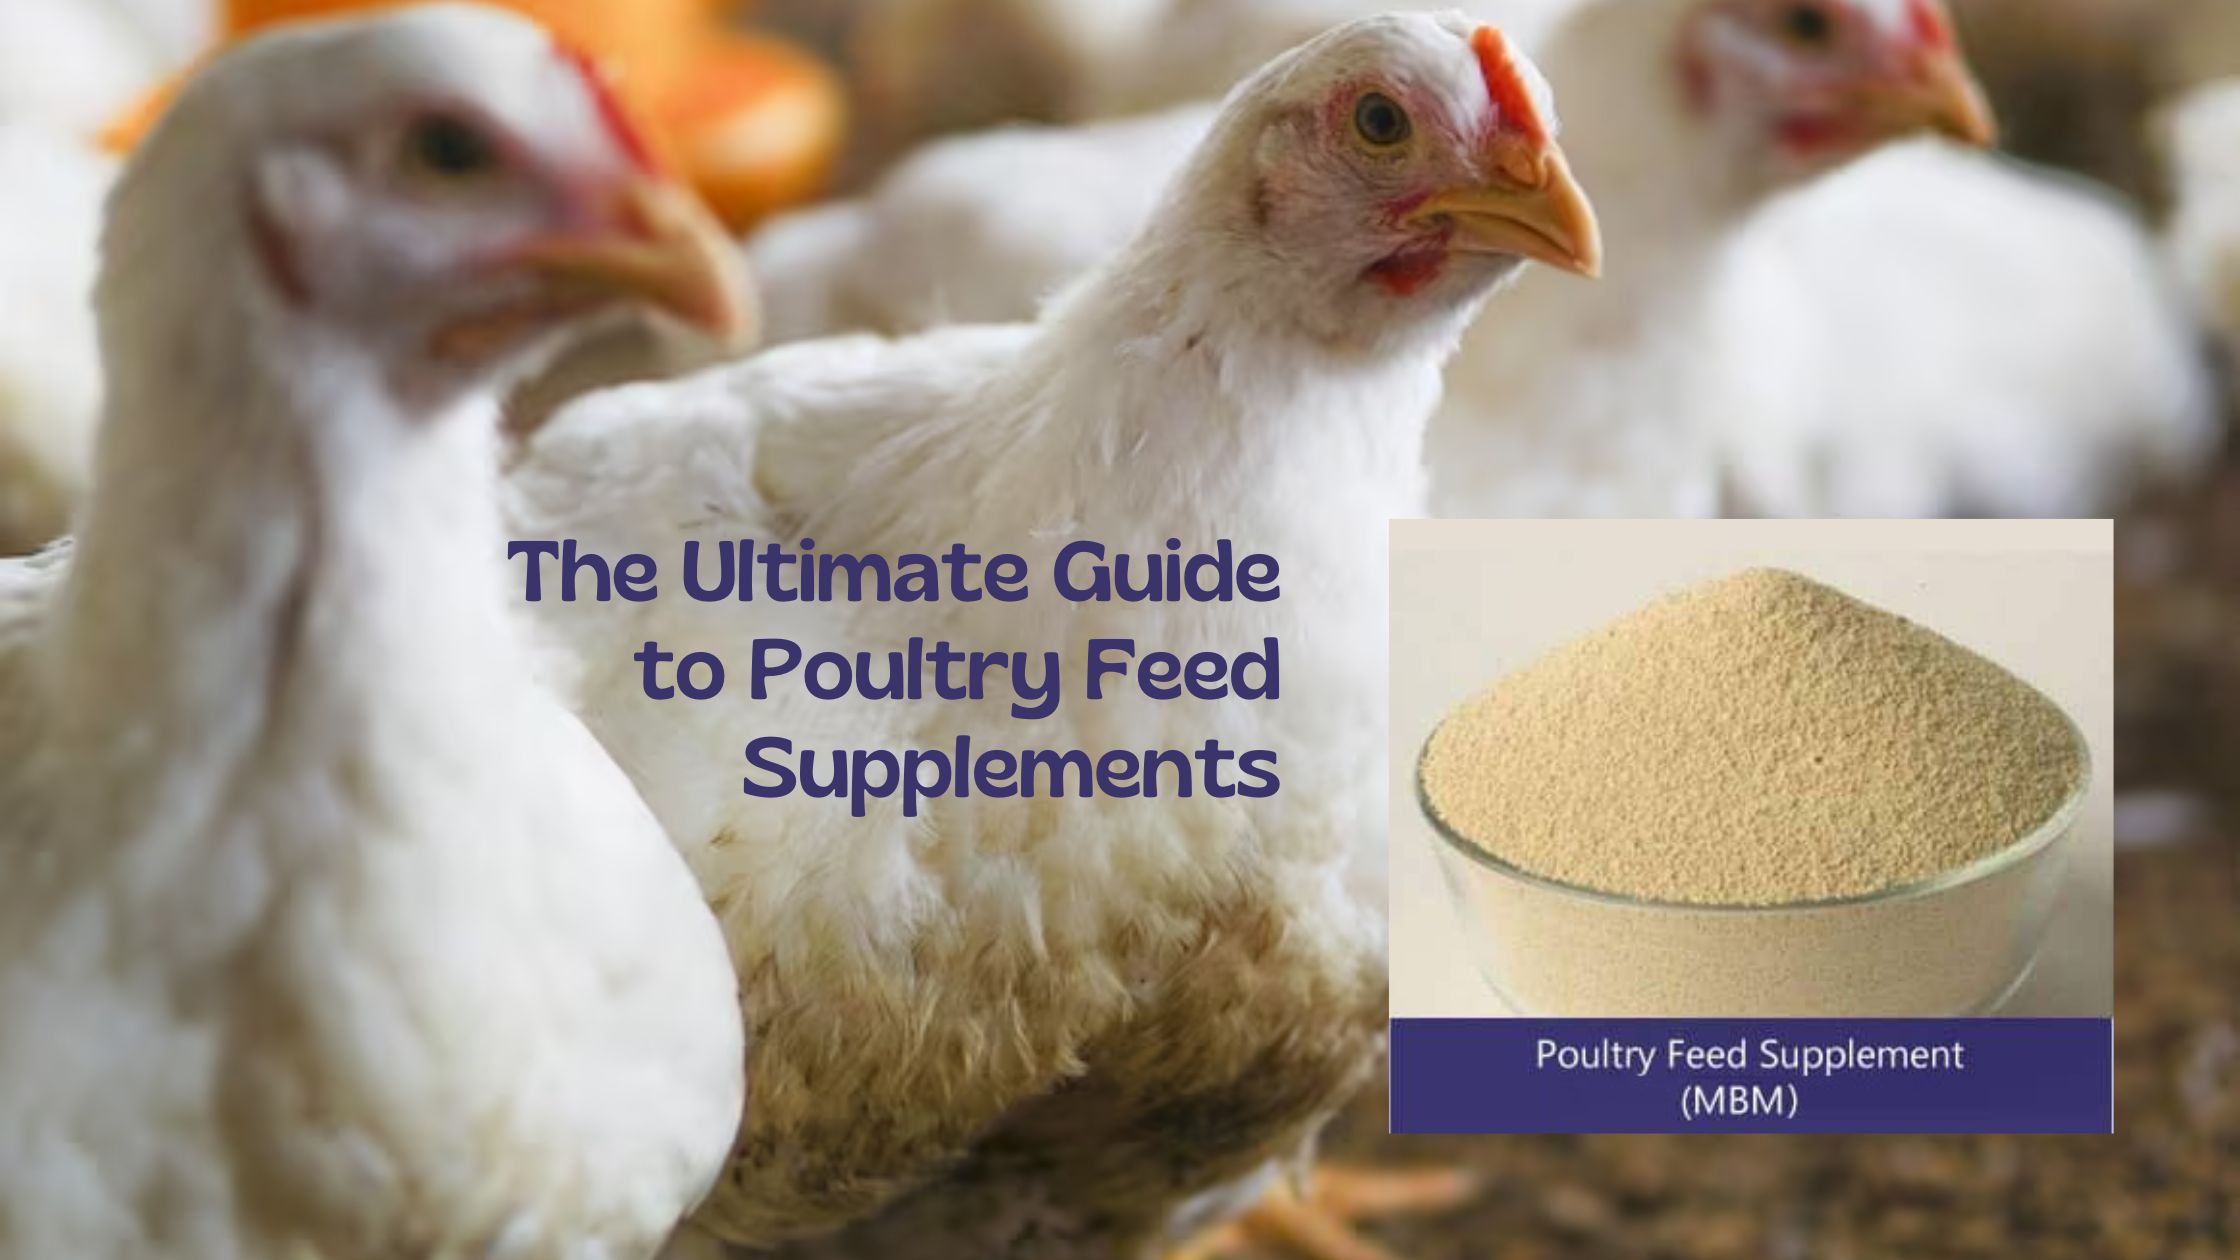 The Ultimate Guide to Poultry Feed Supplements